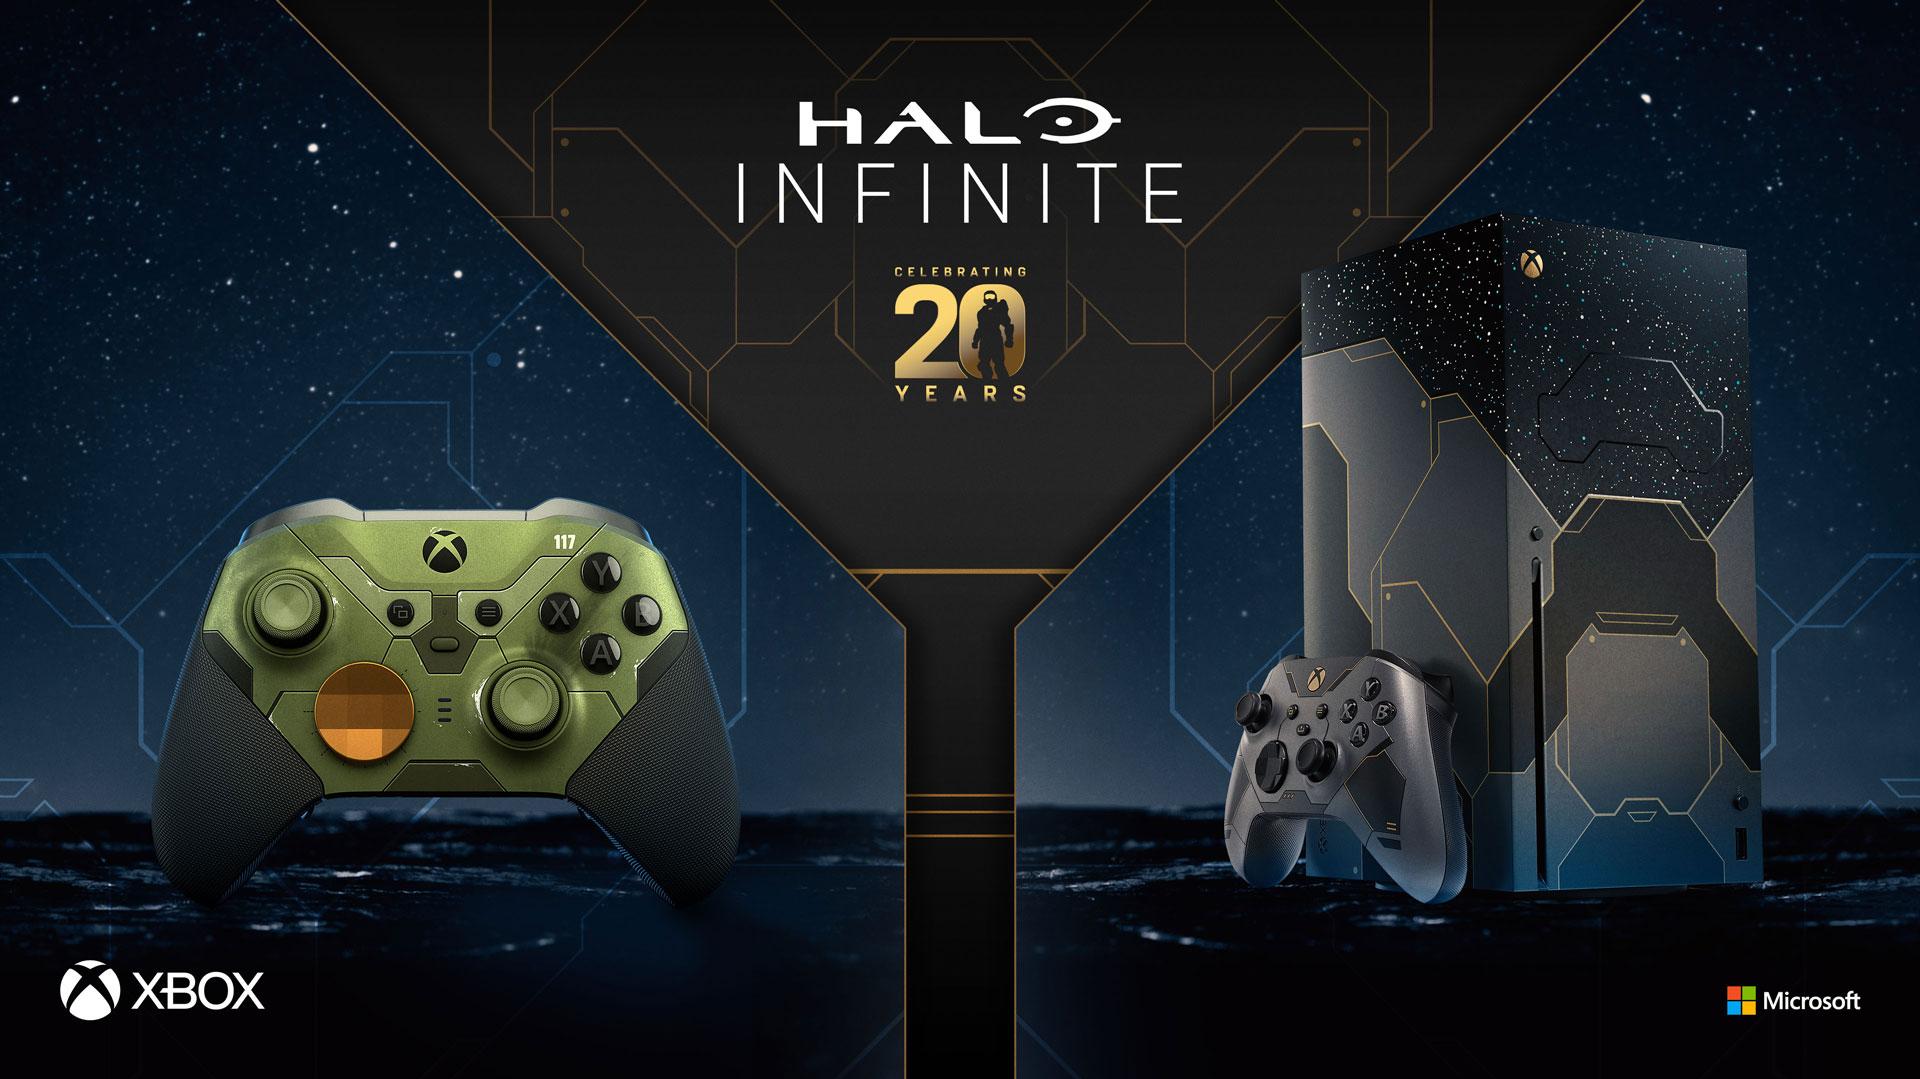 Commemorate 20 Years of Halo with an Xbox Series X Halo Infinite